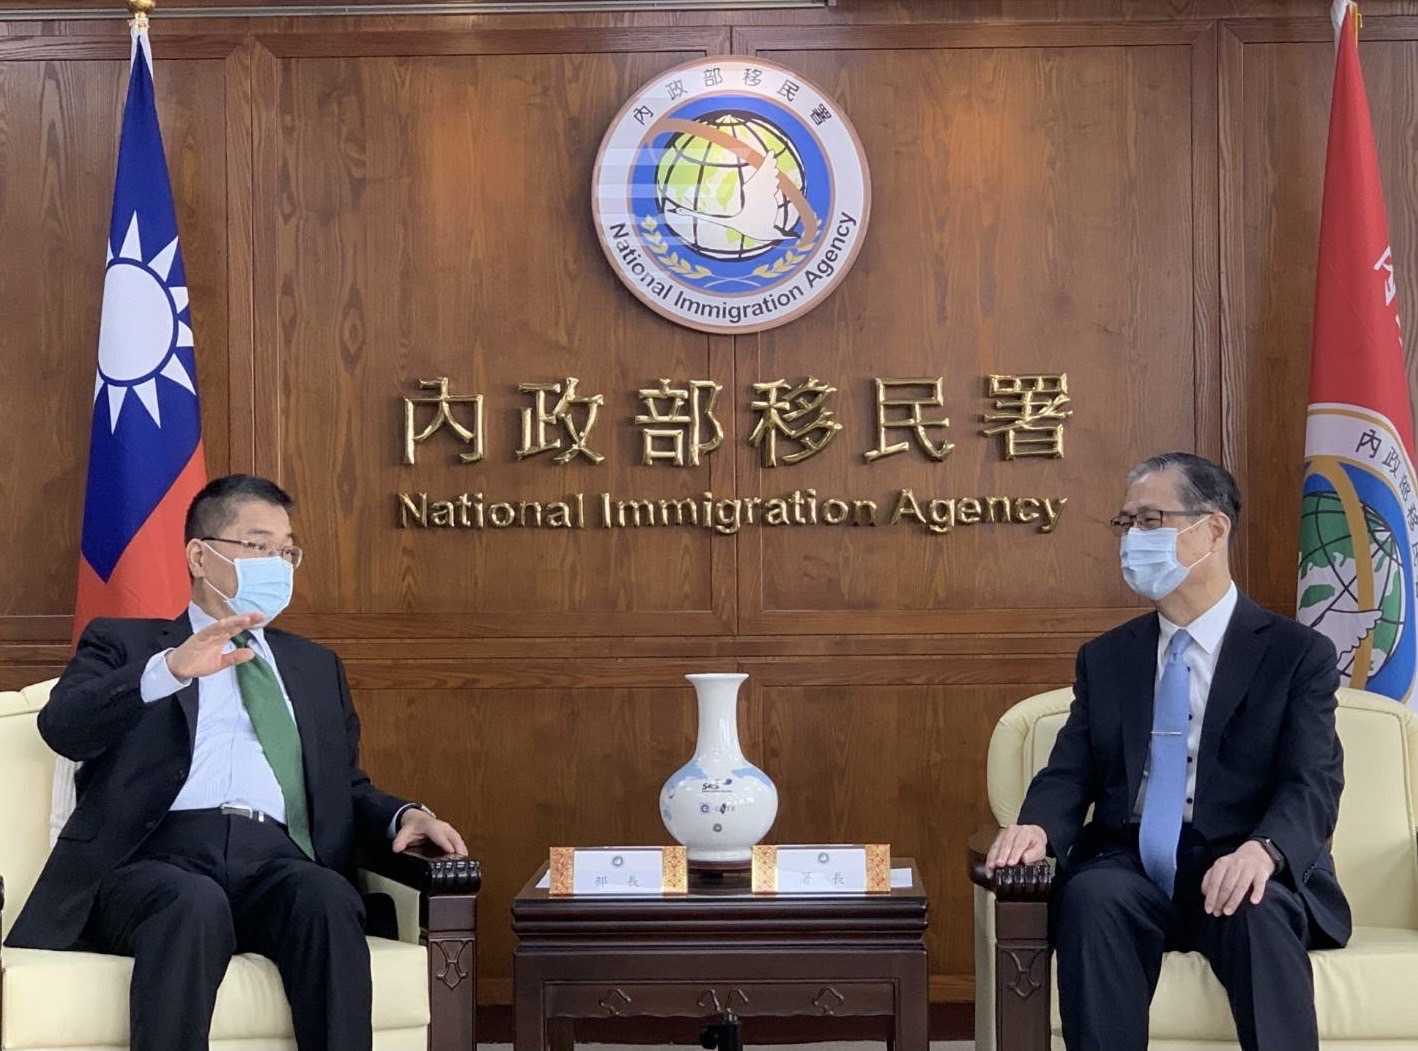 The Minister of the Interior Hsu Kuo-Yung (left) went to thank colleagues and discussed with the Director of the National Immigration Agency Chung Ching-Kun (right). (Photo/provided by the National Immigration Agency)